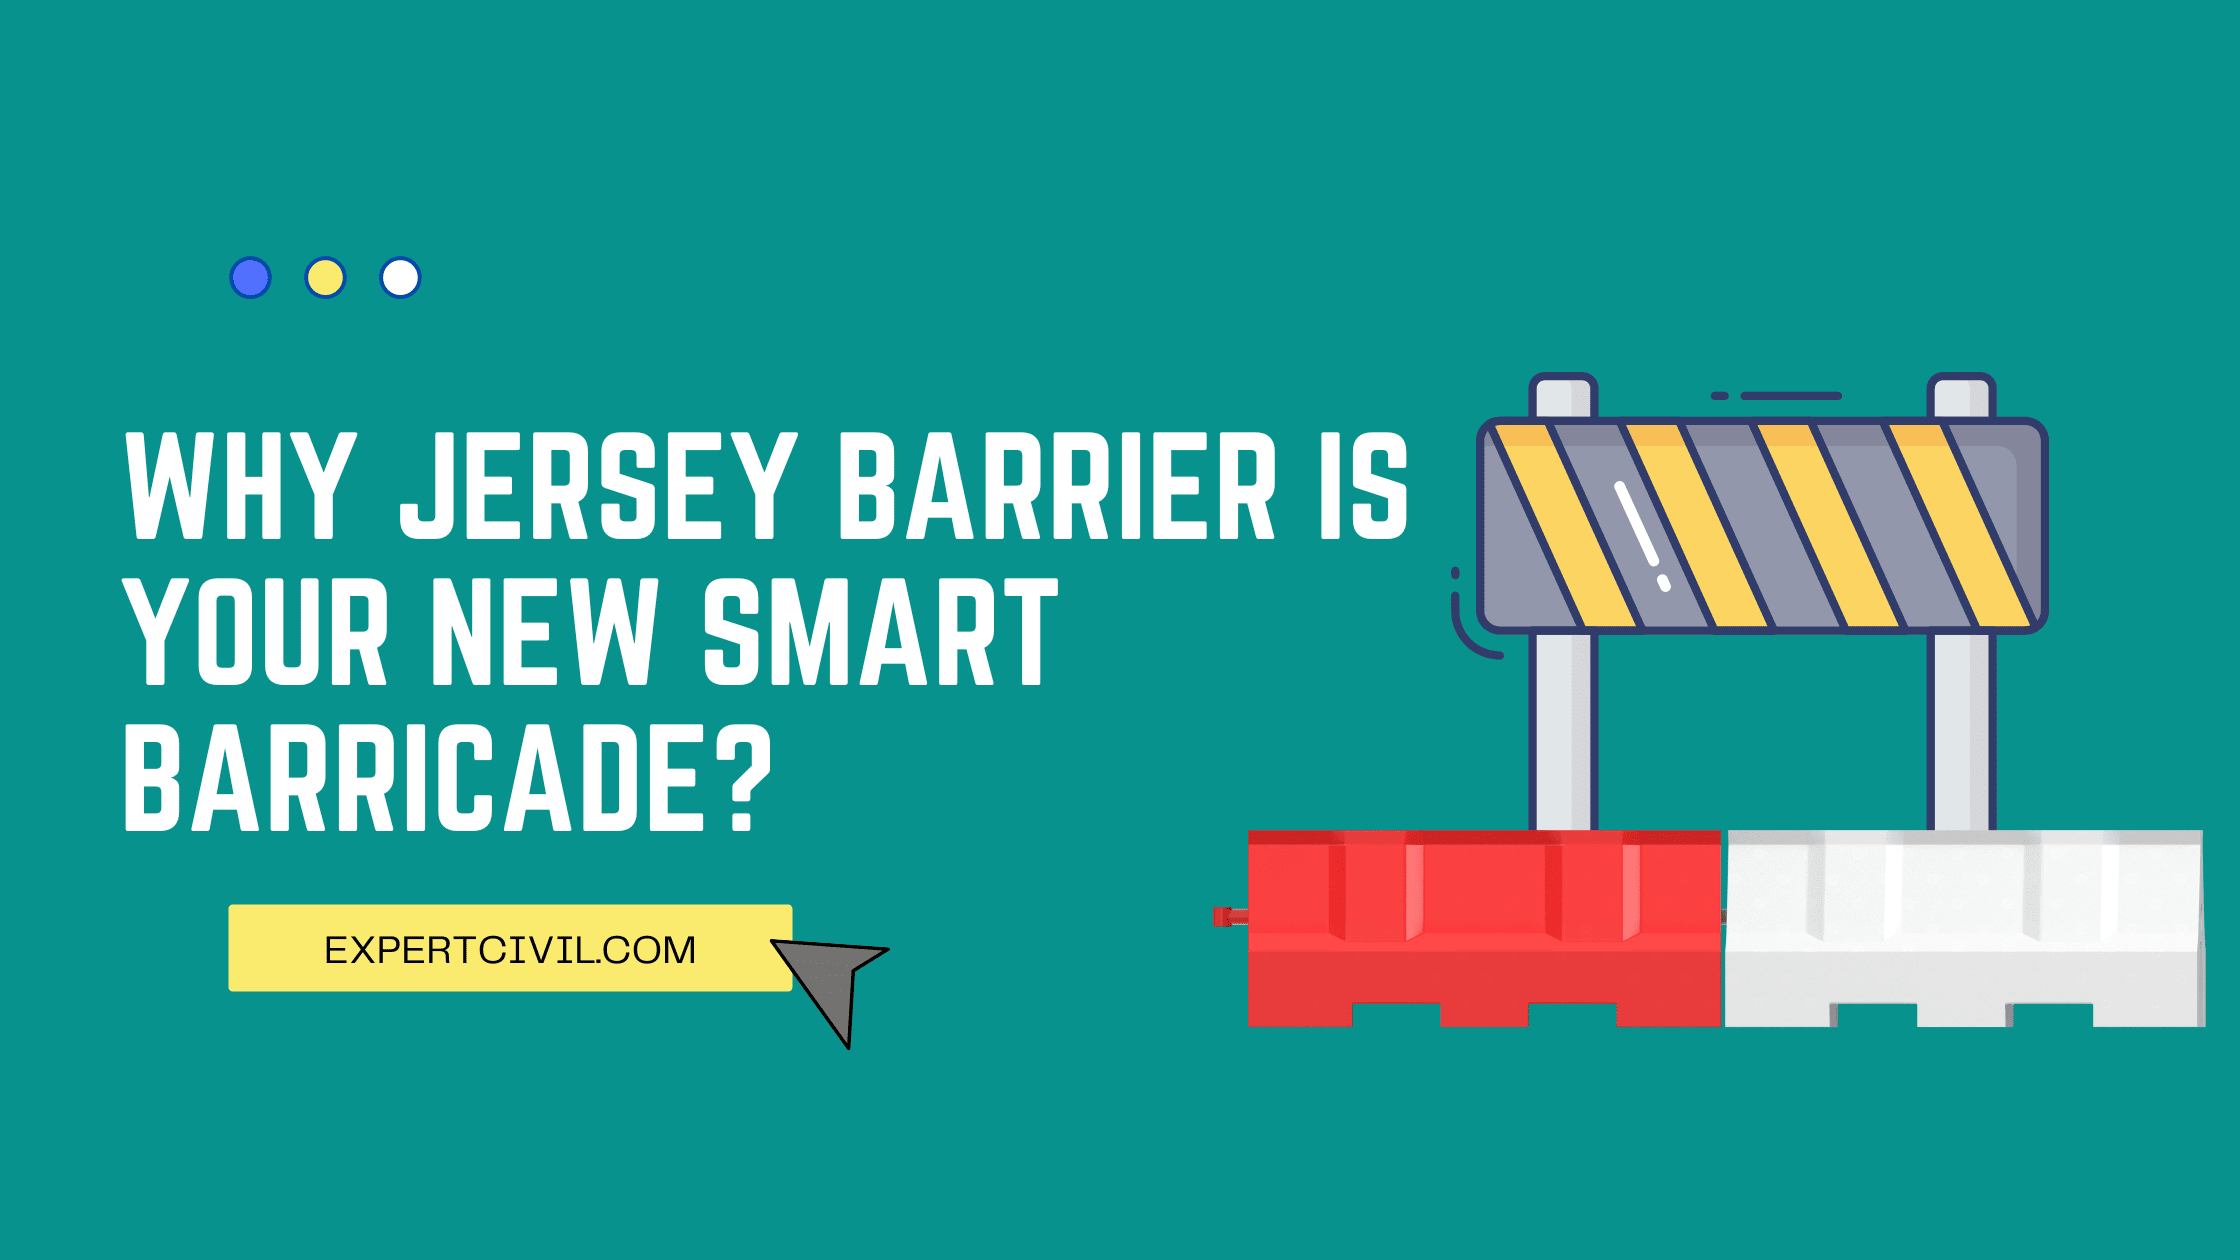 Why Jersey Barrier is Your New Smart Barricade?